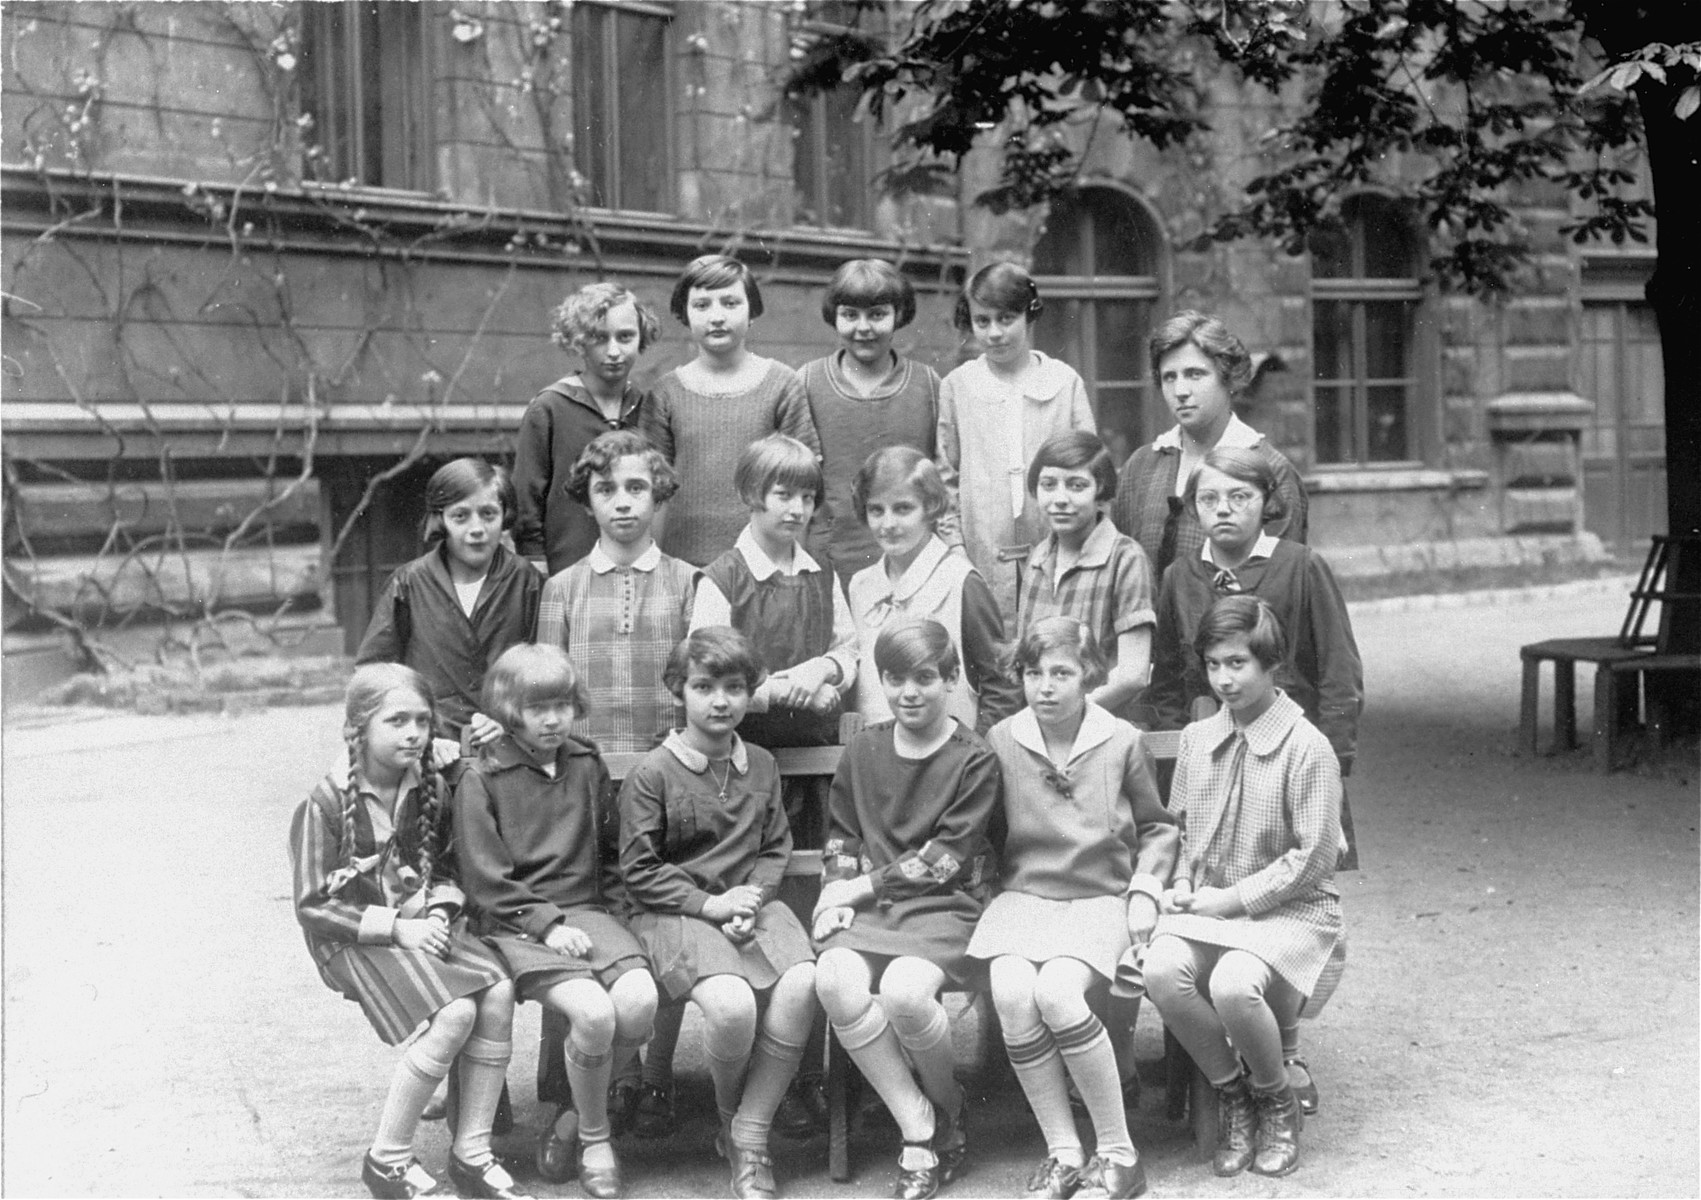 Group portrait of pupils at the Deutsches Maedchen Reform Real Gymnasium Lycee in Prague.

Among those pictured is Ruth Kohn (top row, second from the left).